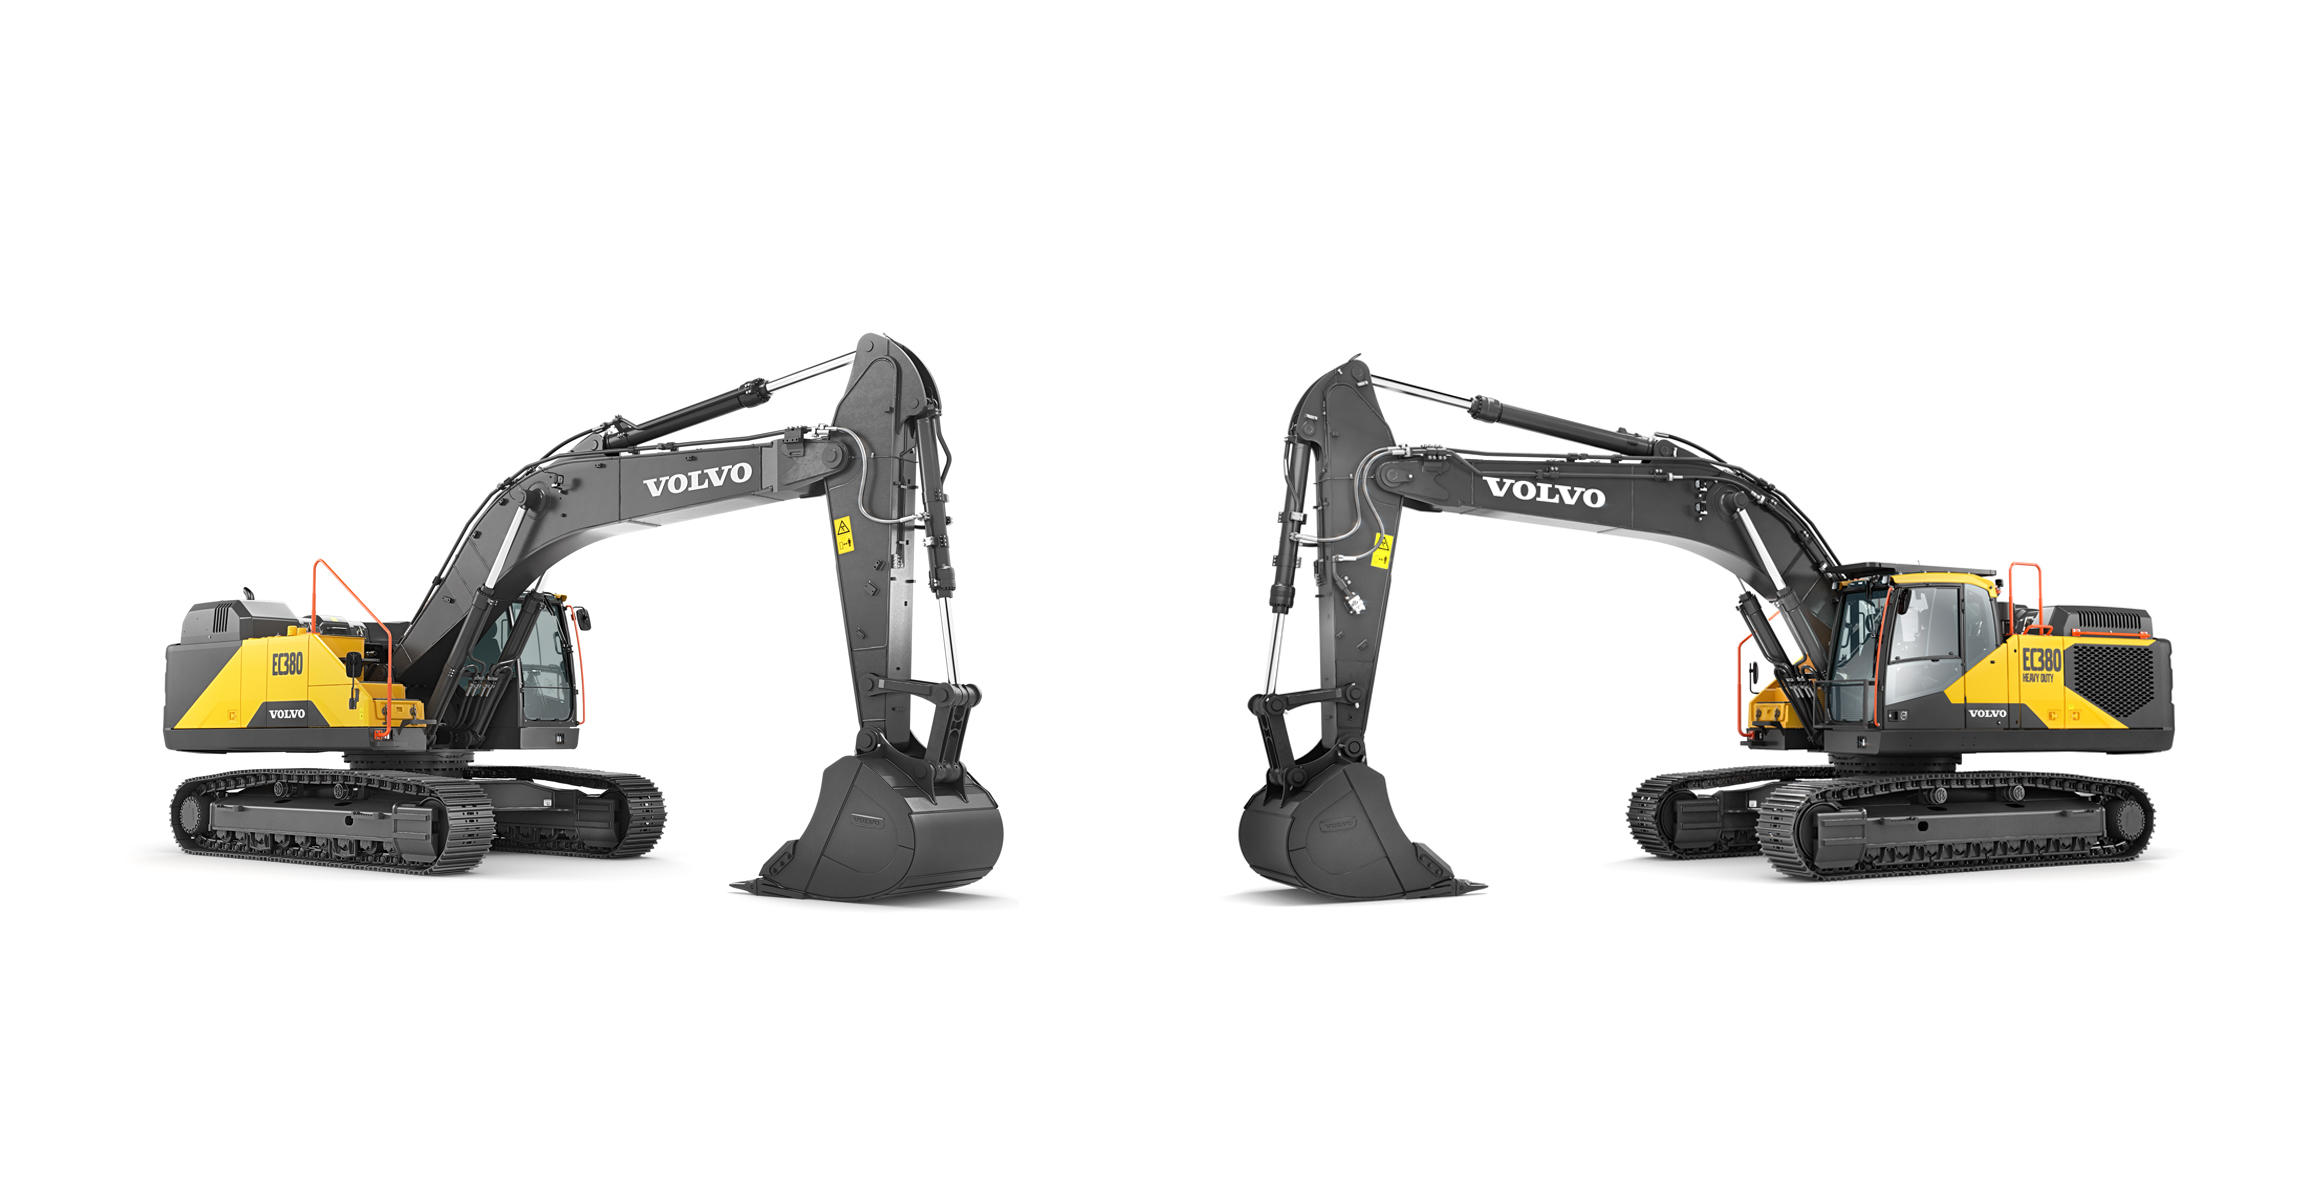 volvo-ce-launching-two-new-<a href='http://product.global-ce.com/crawler_excavator/' target='_blank' style='color:blue;'>Excavator</a>-ranges-designed-and-made-in-china-for-china_01